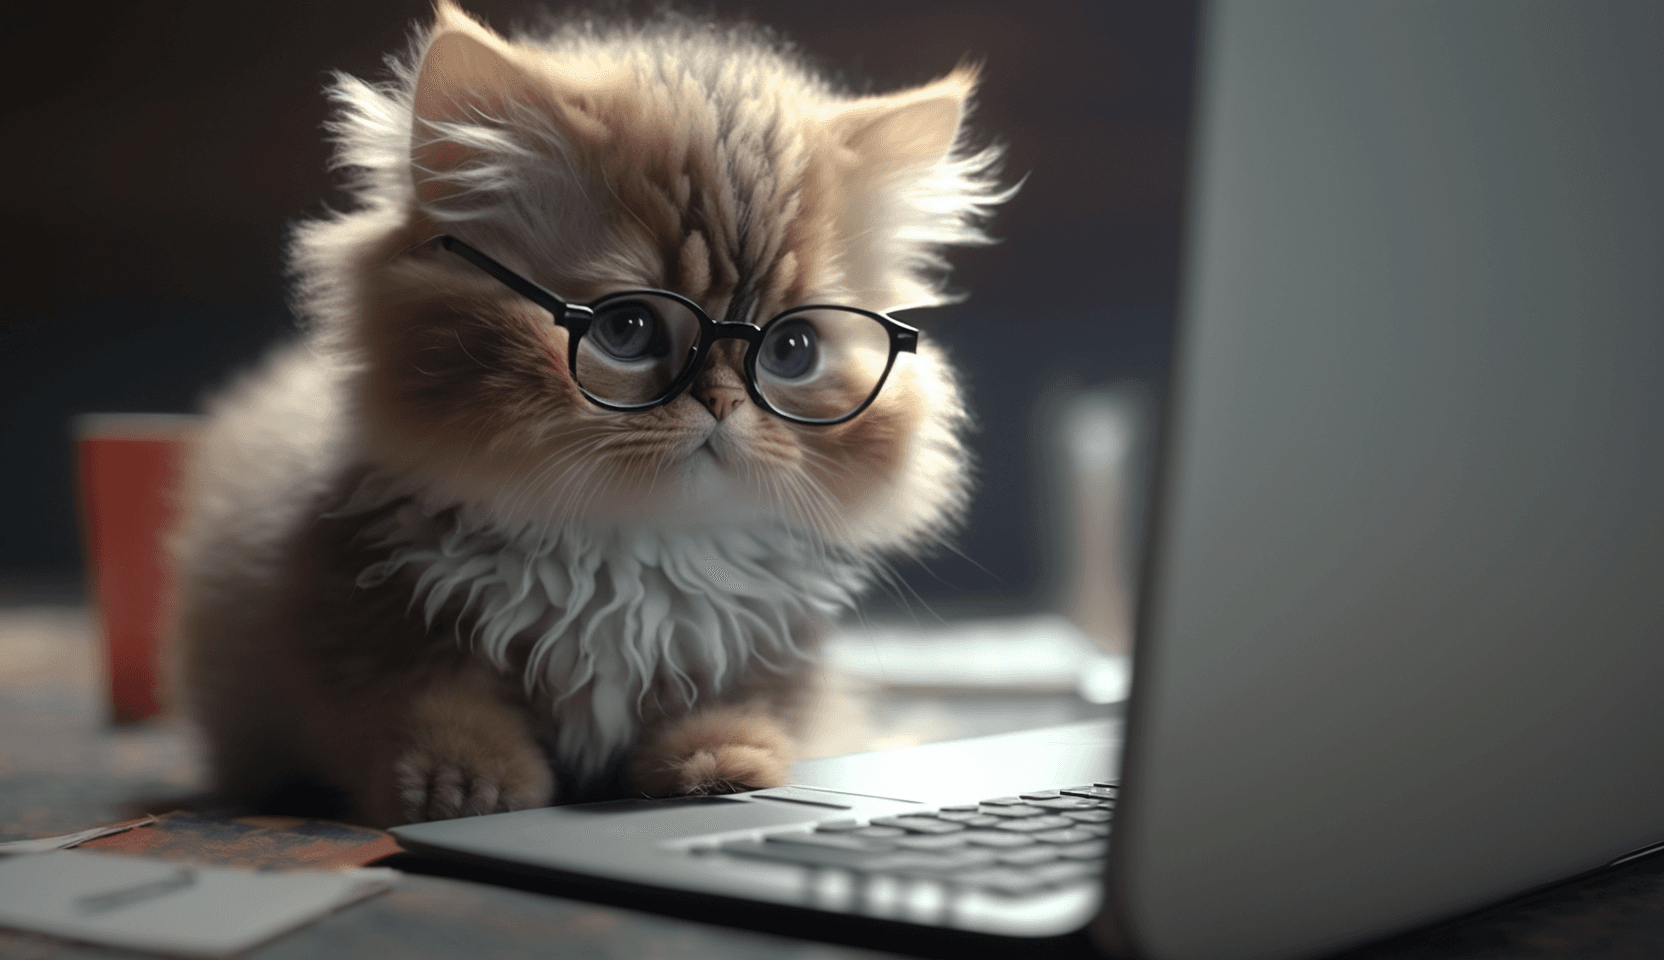 kitten with glasses using a laptop